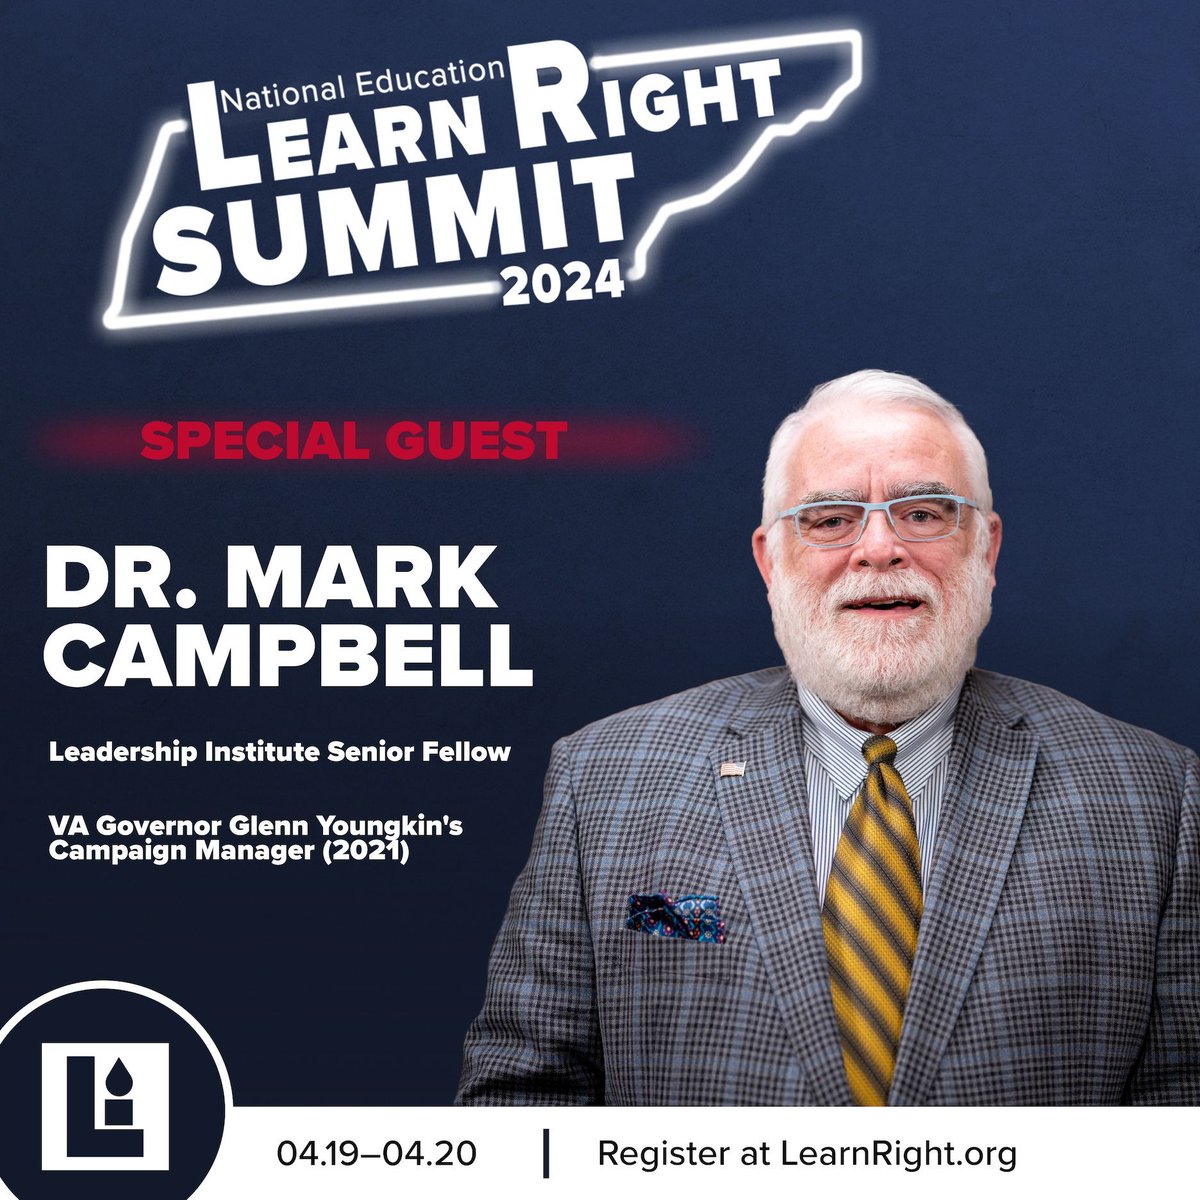 Join Special Guest Dr. Mark Campbell at the #learnright24 Summit in Nashville THIS weekend!

Sign up NOW at learnright.org

 #learnright #lr24 #nashville #tn #education #learnleadwin #learnright #school #schoolboard #usa #leaders #conservative #leadershipinstitute #lead